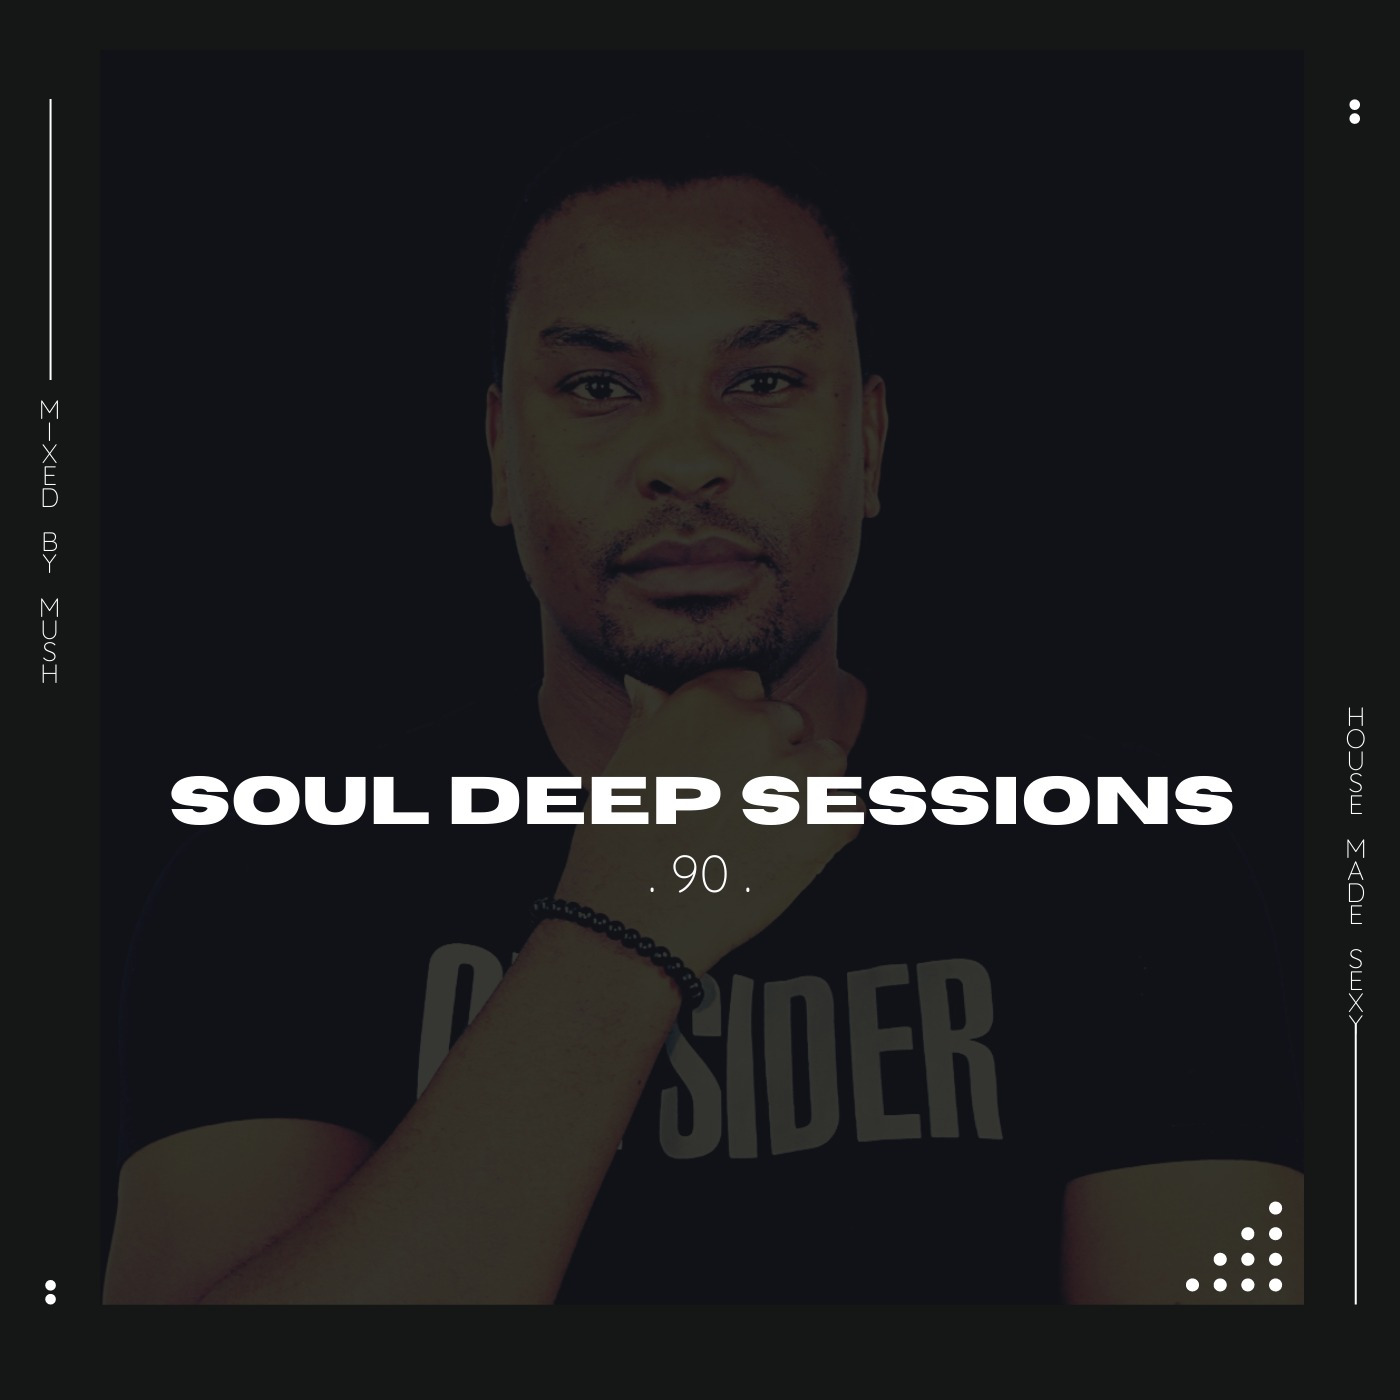 Soul Deep Sessions 90 mixed by Mush